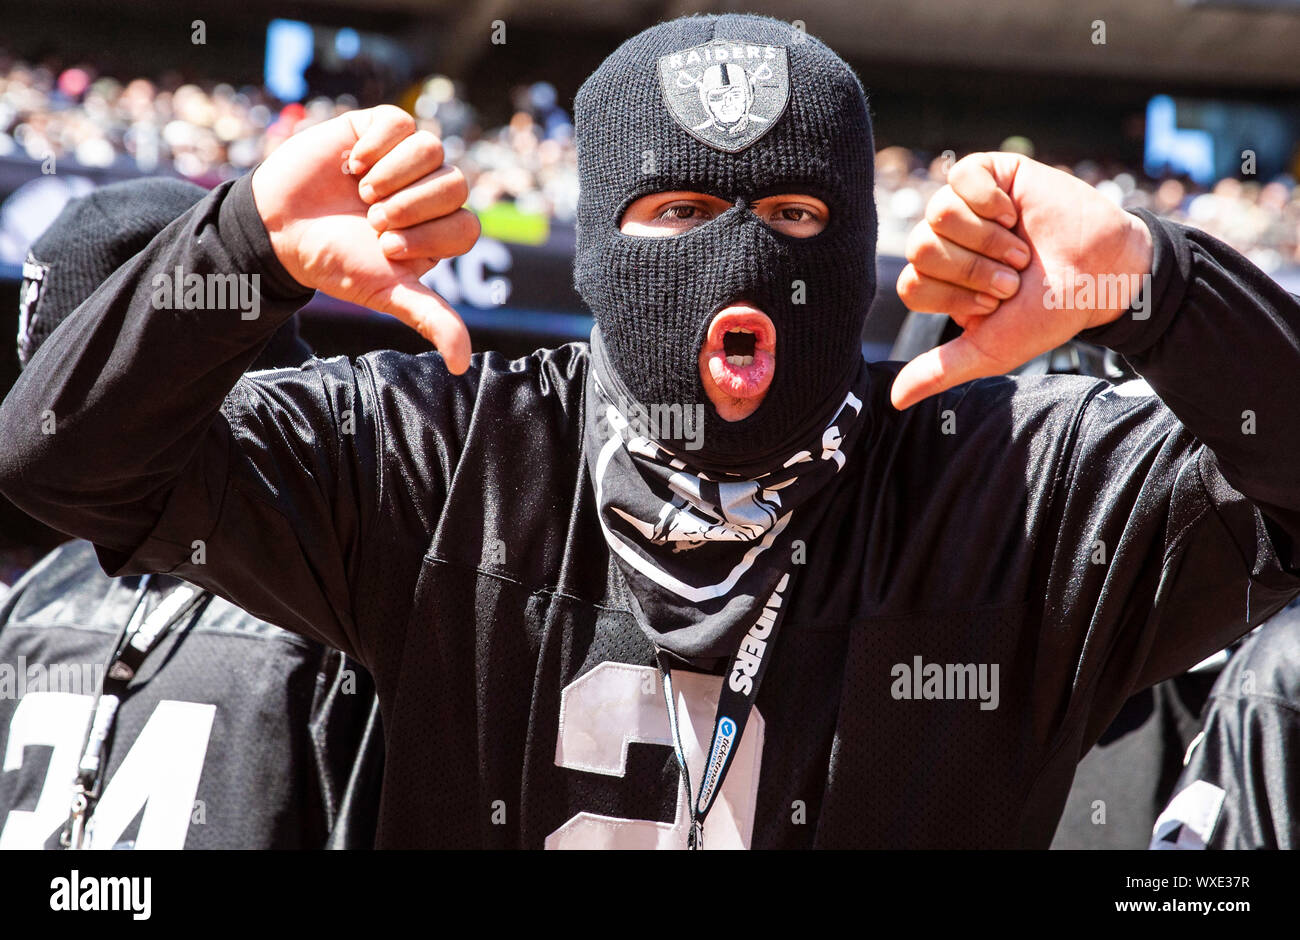 RingCentral Coliseum Oakland Calif, USA. 15th Sep, 2019. U.S.A Oakland Raiders fans during the NFL football game between Kansas City Chiefs and the Oakland Raiders 10-28 lost at RingCentral Coliseum Oakland Calif. Thurman James/CSM/Alamy Live News Stock Photo